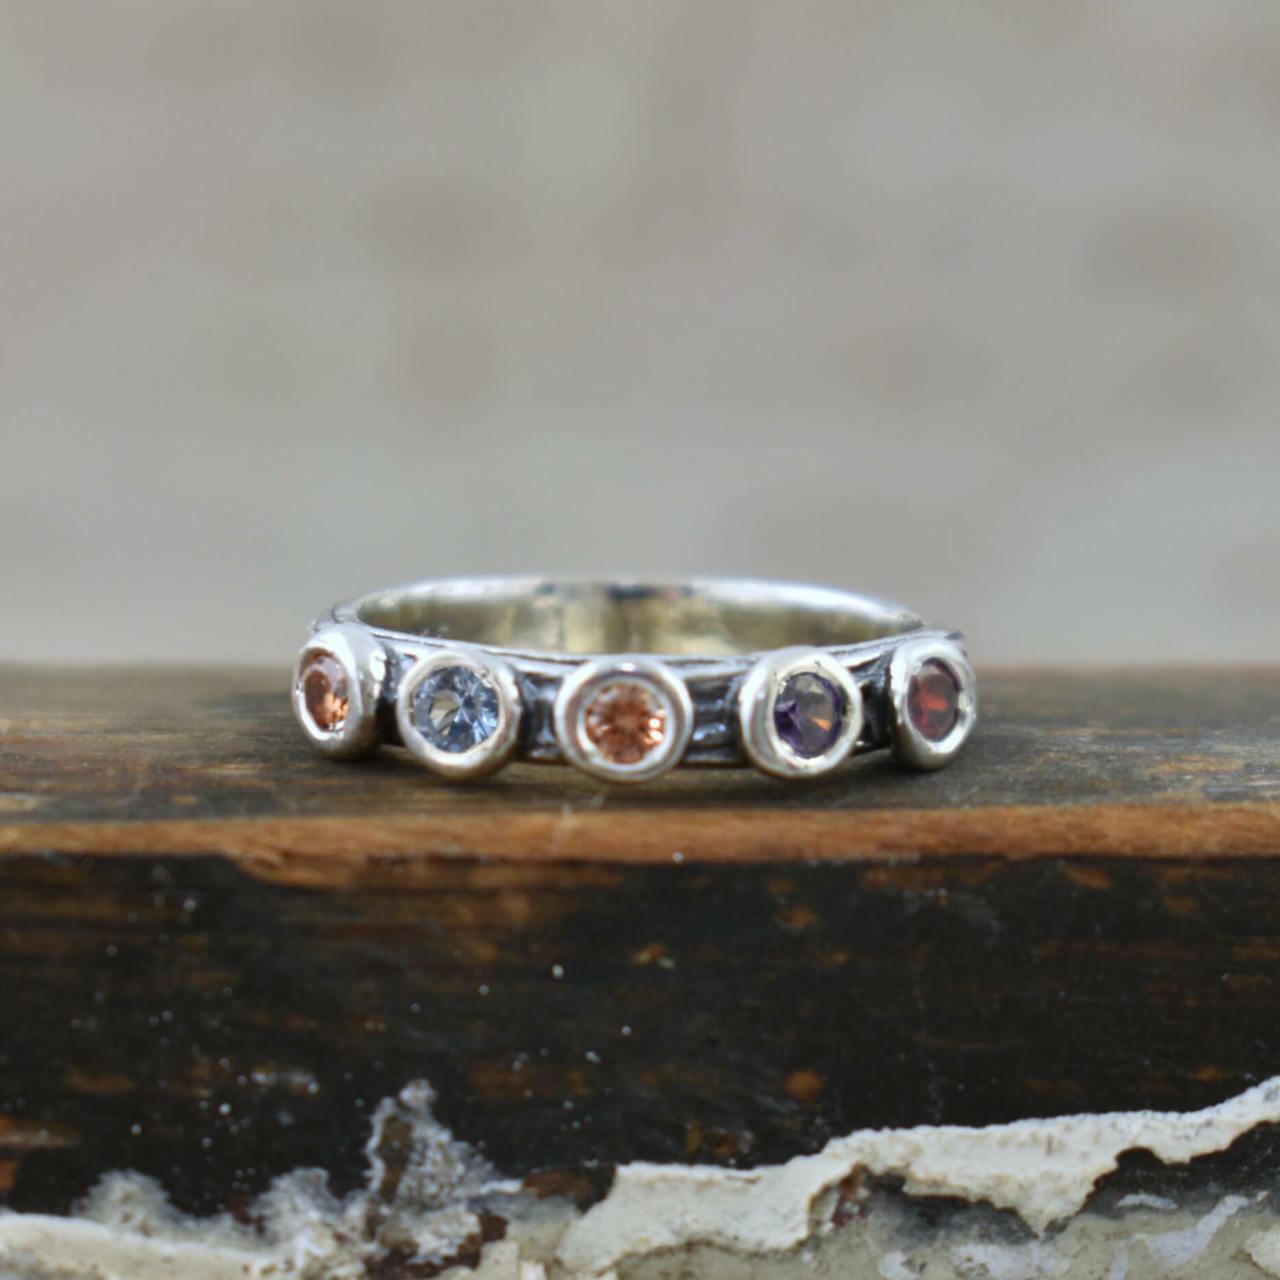 Handcrafted sterling silver and CZ birthstone ring